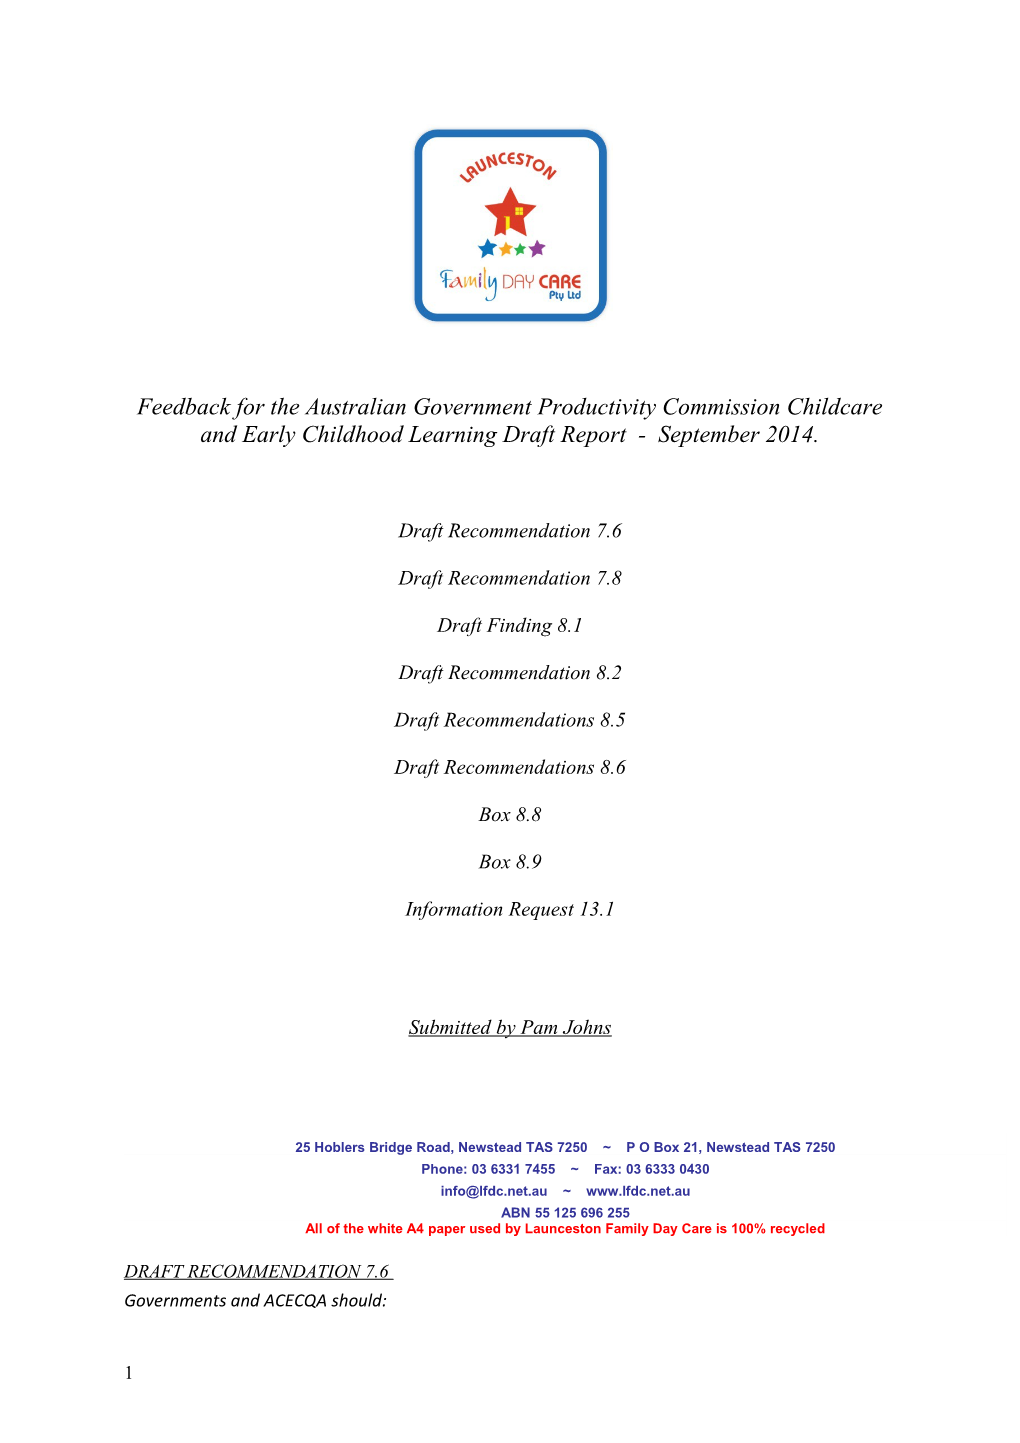 Submission DR751 - Launceston Family Day Care - Childcare and Early Childhood Learning